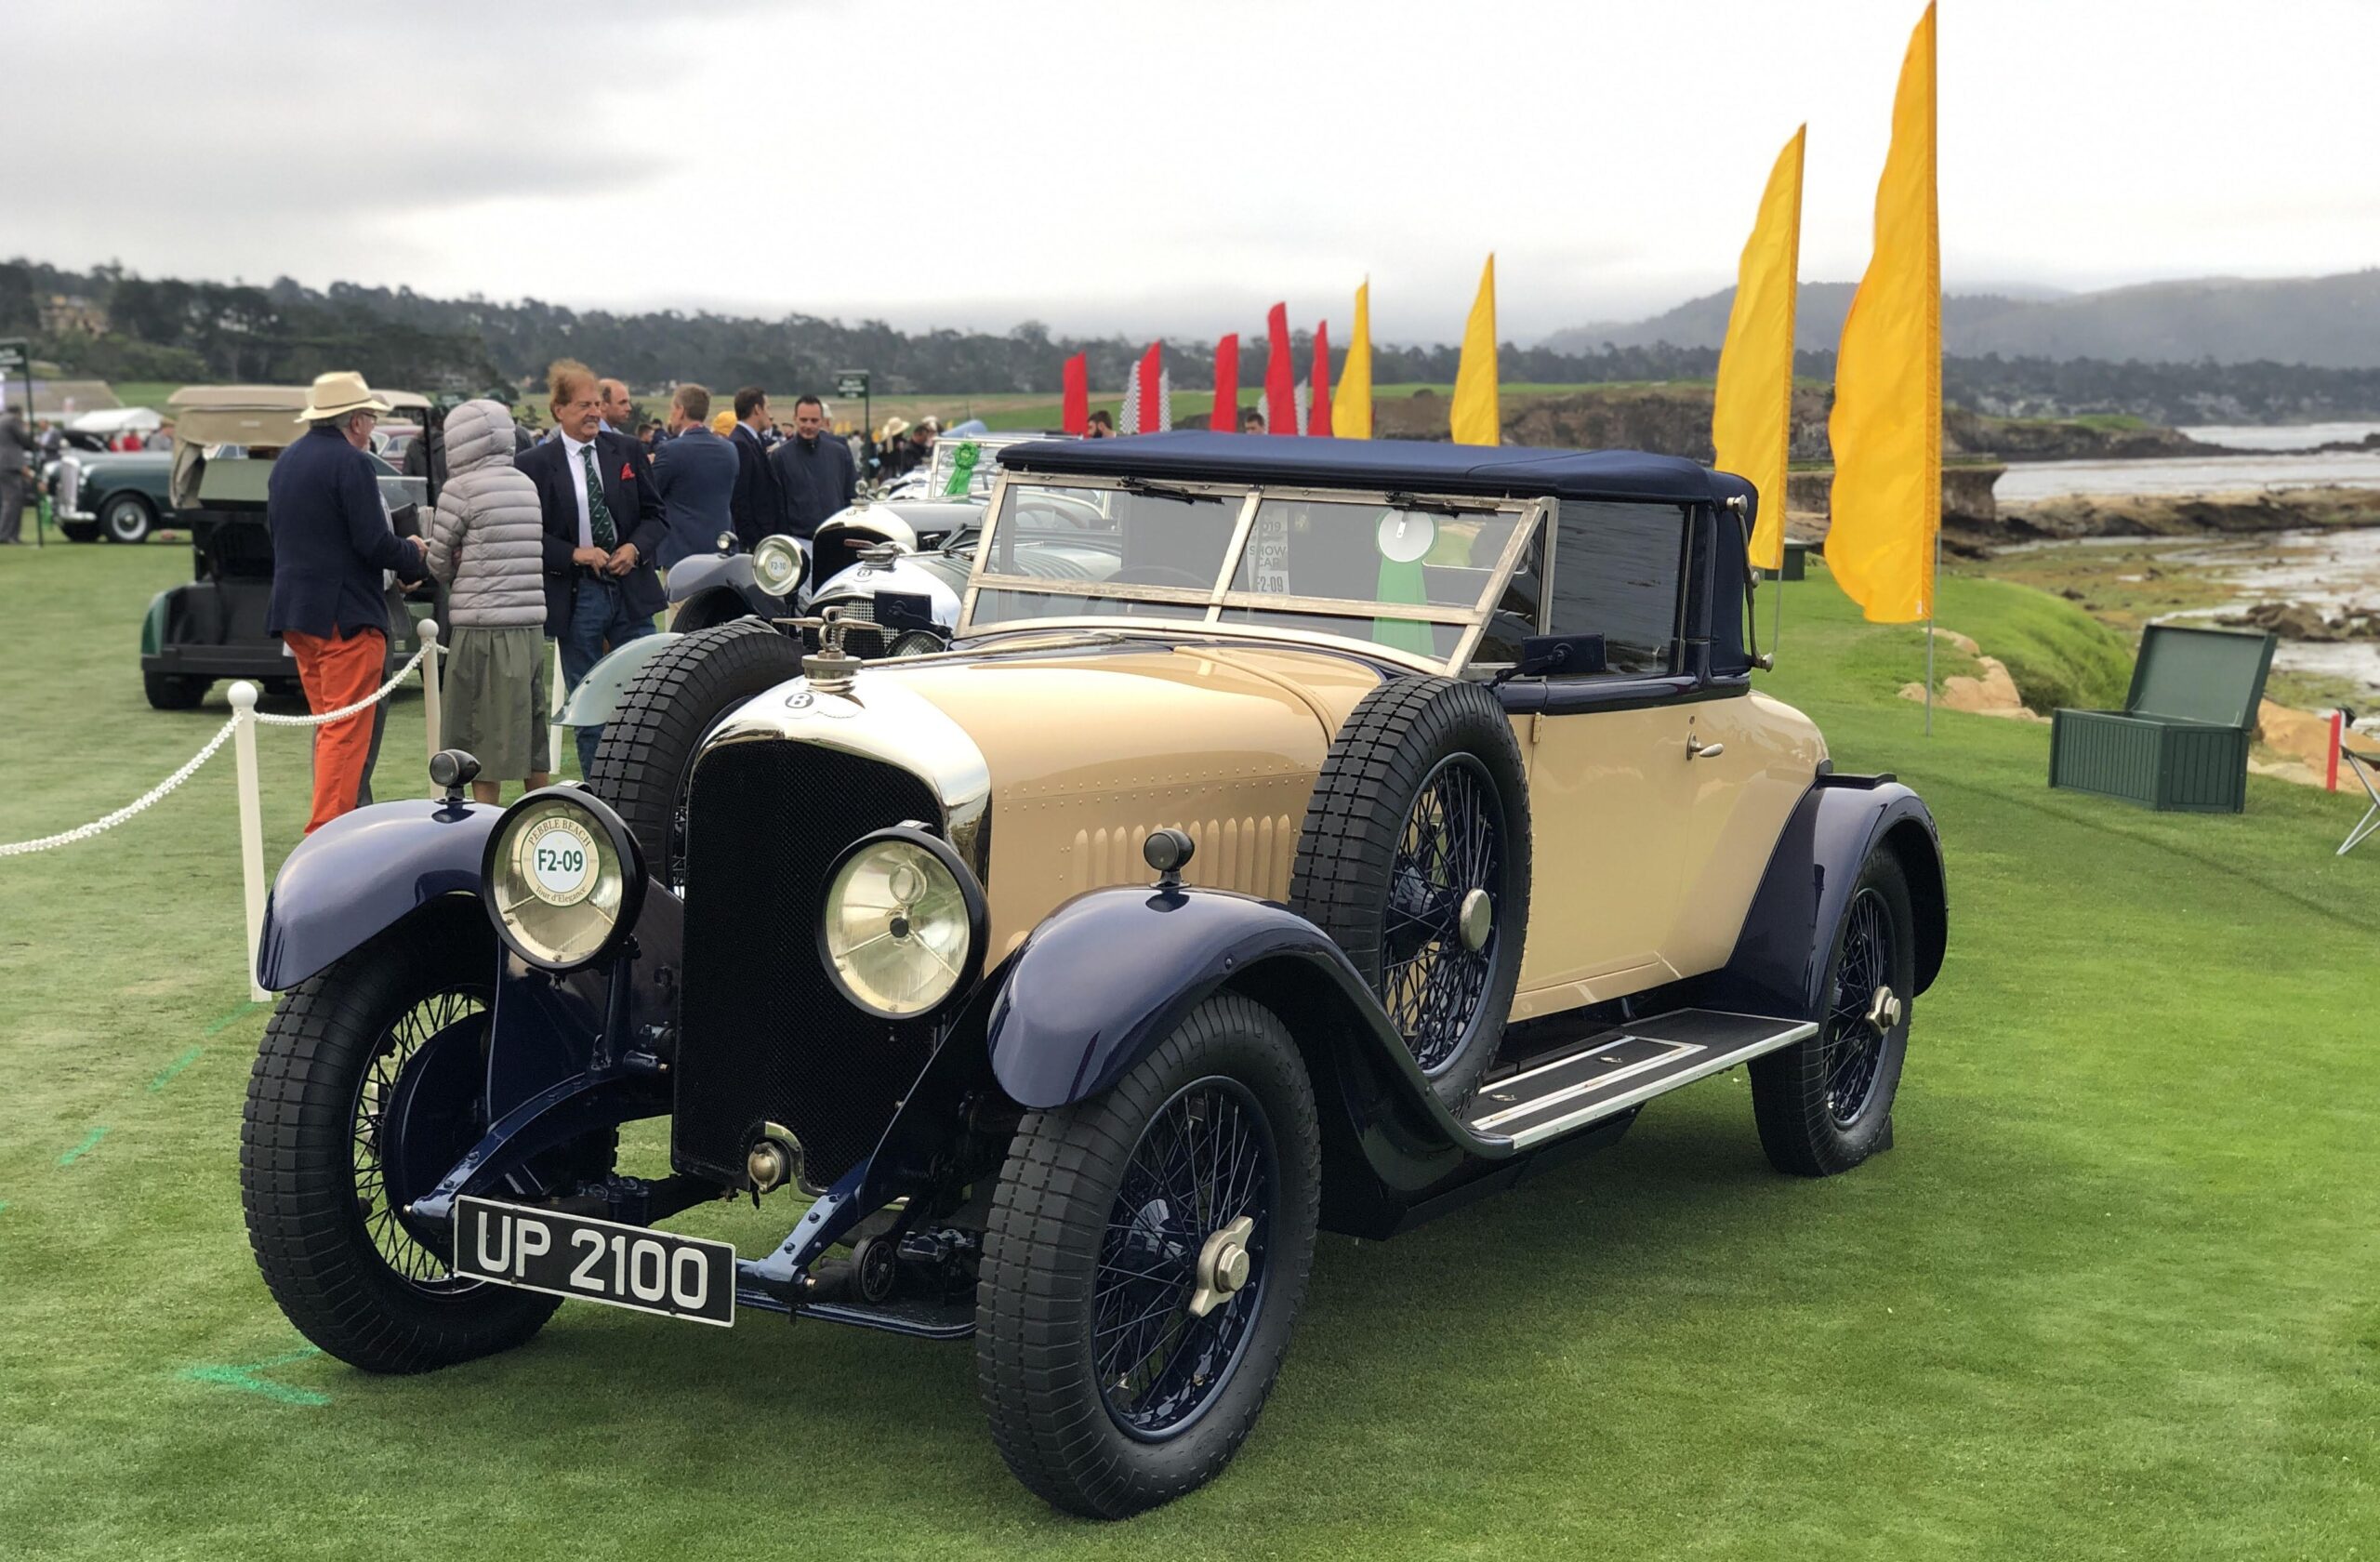 A 1928 Bentley 4.5-litre with Victor Broom drophead coachwork. Shown at Pebble Beach Concours dElegance in 2019 and at Hampton Court Palace, London. This will be among cars on display at the Southport Classic and Speed event at Victoria Park in Southport